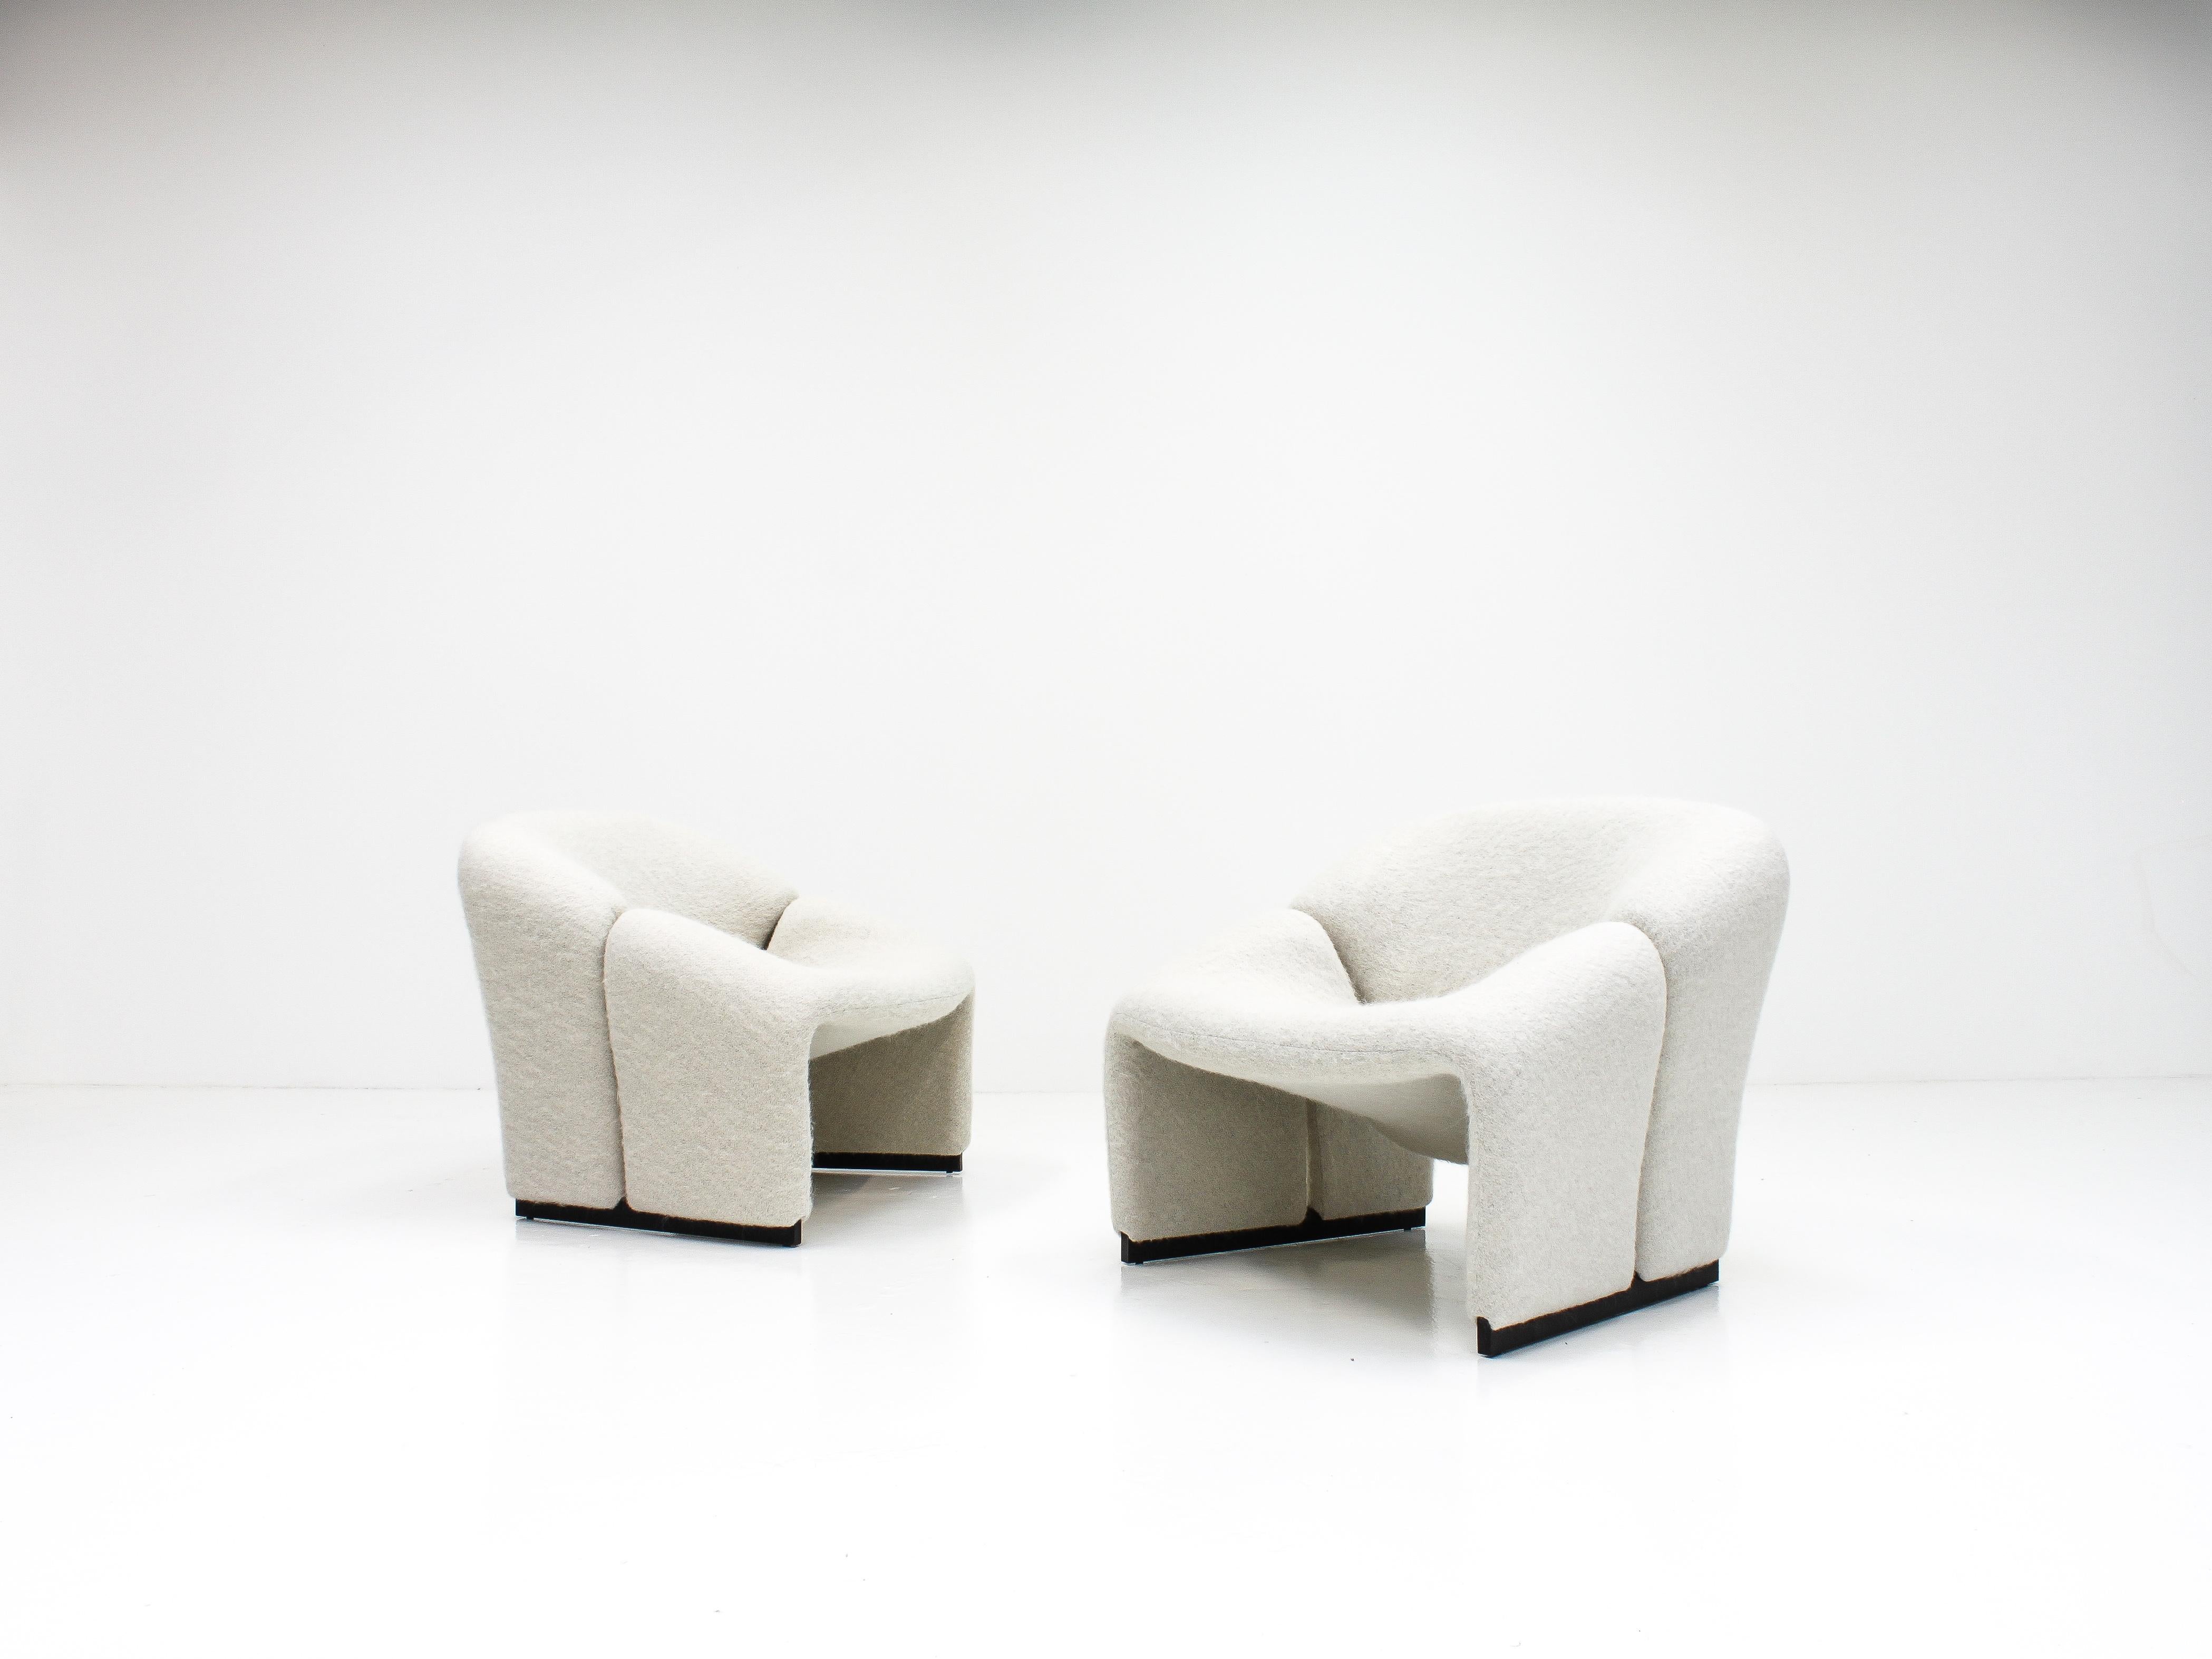 Dutch Pair of Pierre Paulin F580 1st Edition Groovy Chairs in Pierre Frey for Artifort